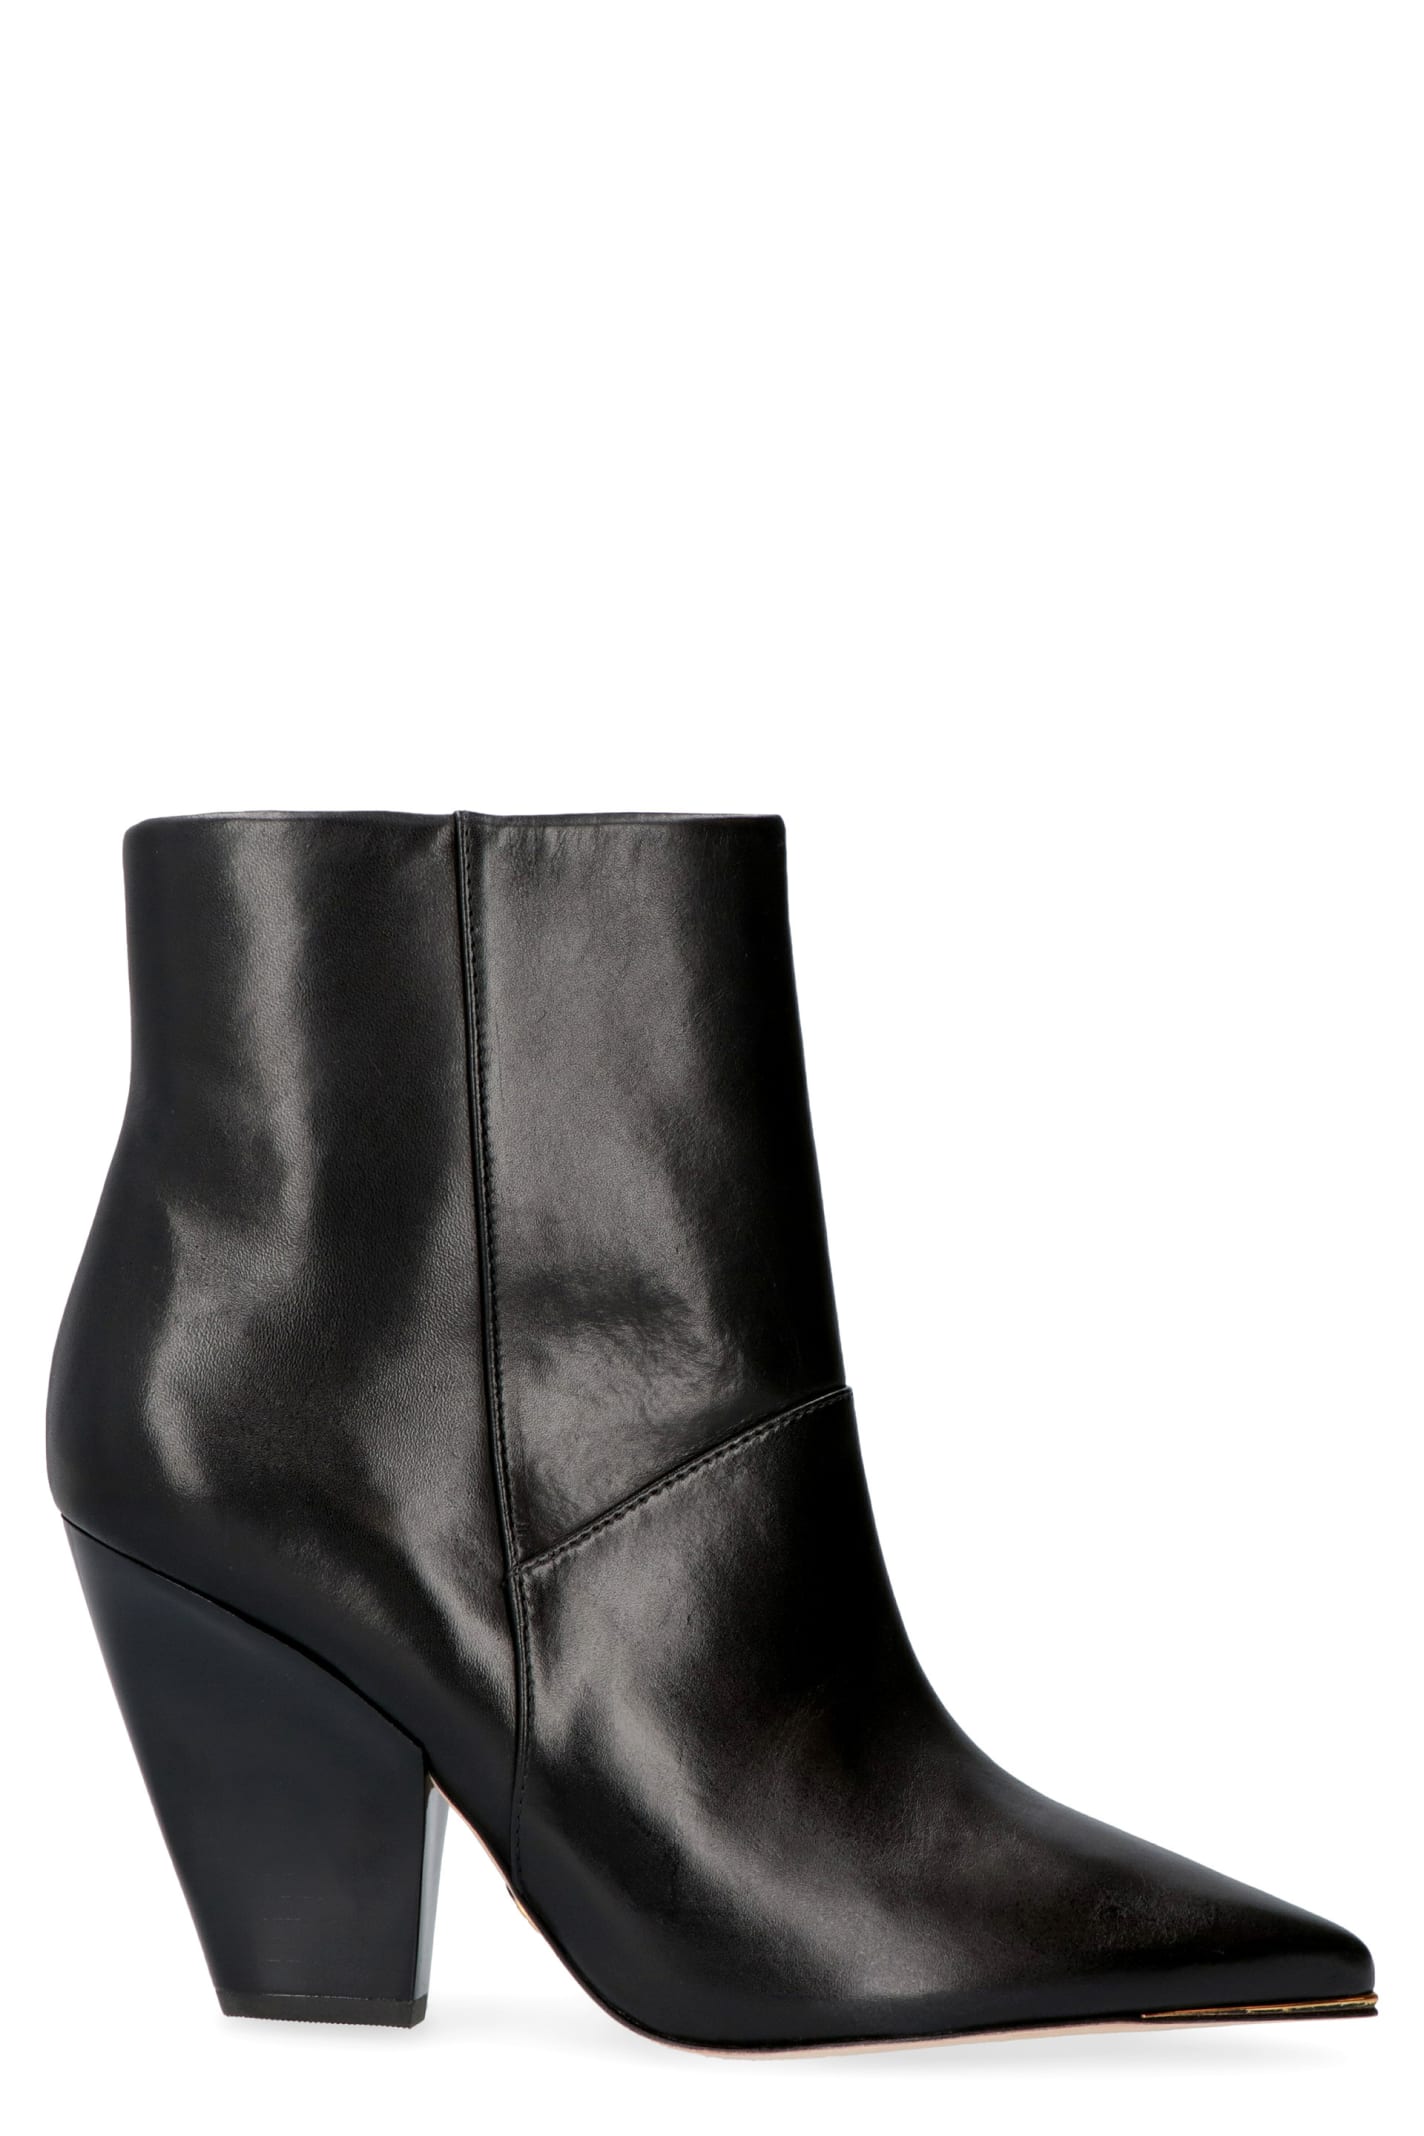 Tory Burch Lila Leather Ankle Boots